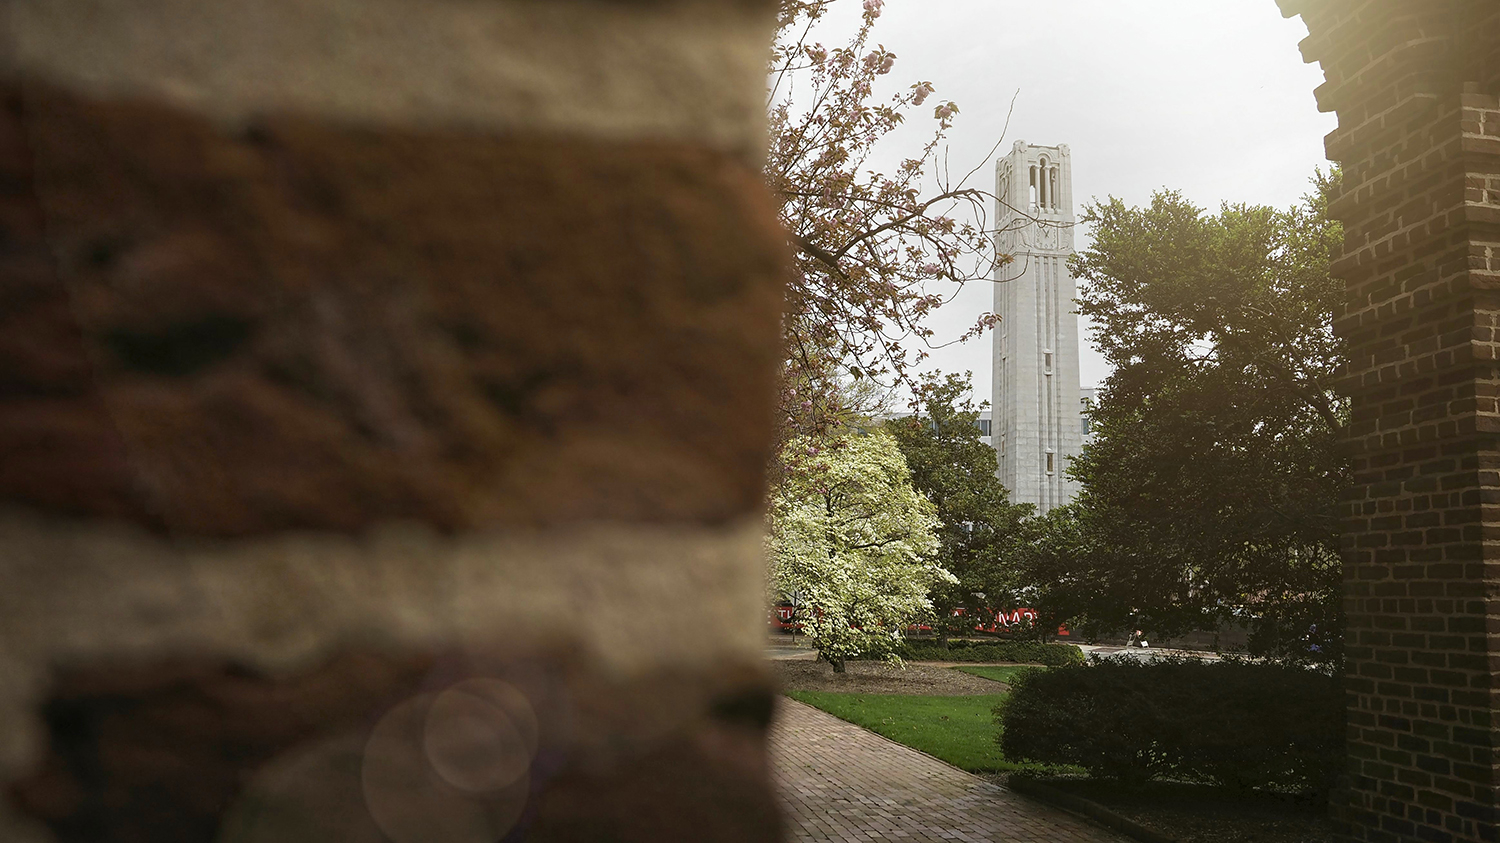 A view of the Belltower in spring as seen through an arch of bricks.